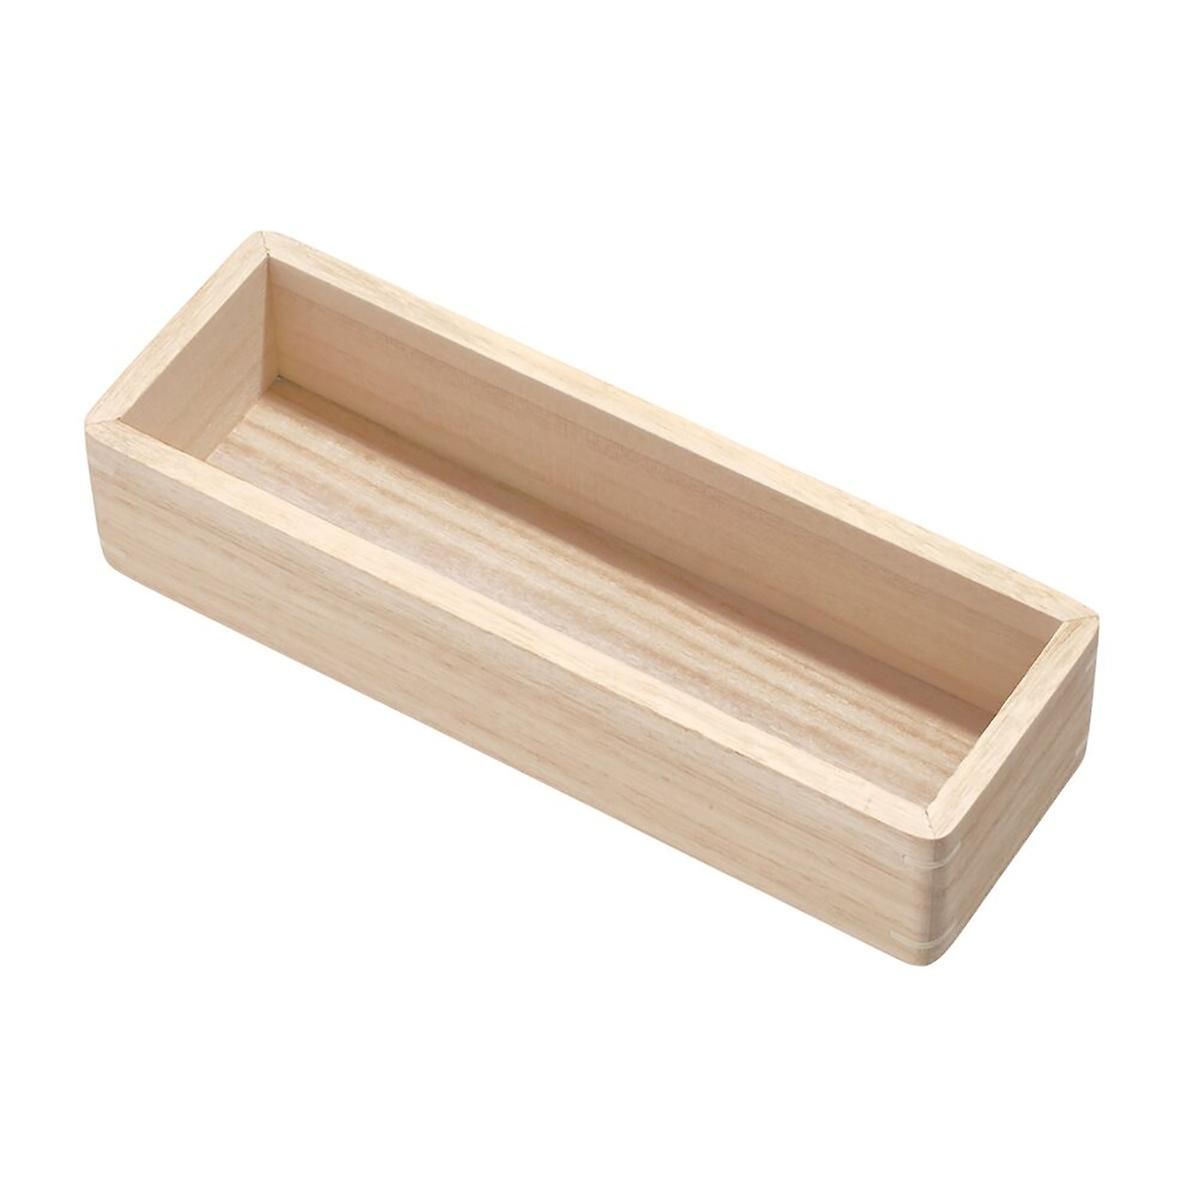 THE HOME EDIT Wooden Drawer Organizer Sand | The Container Store